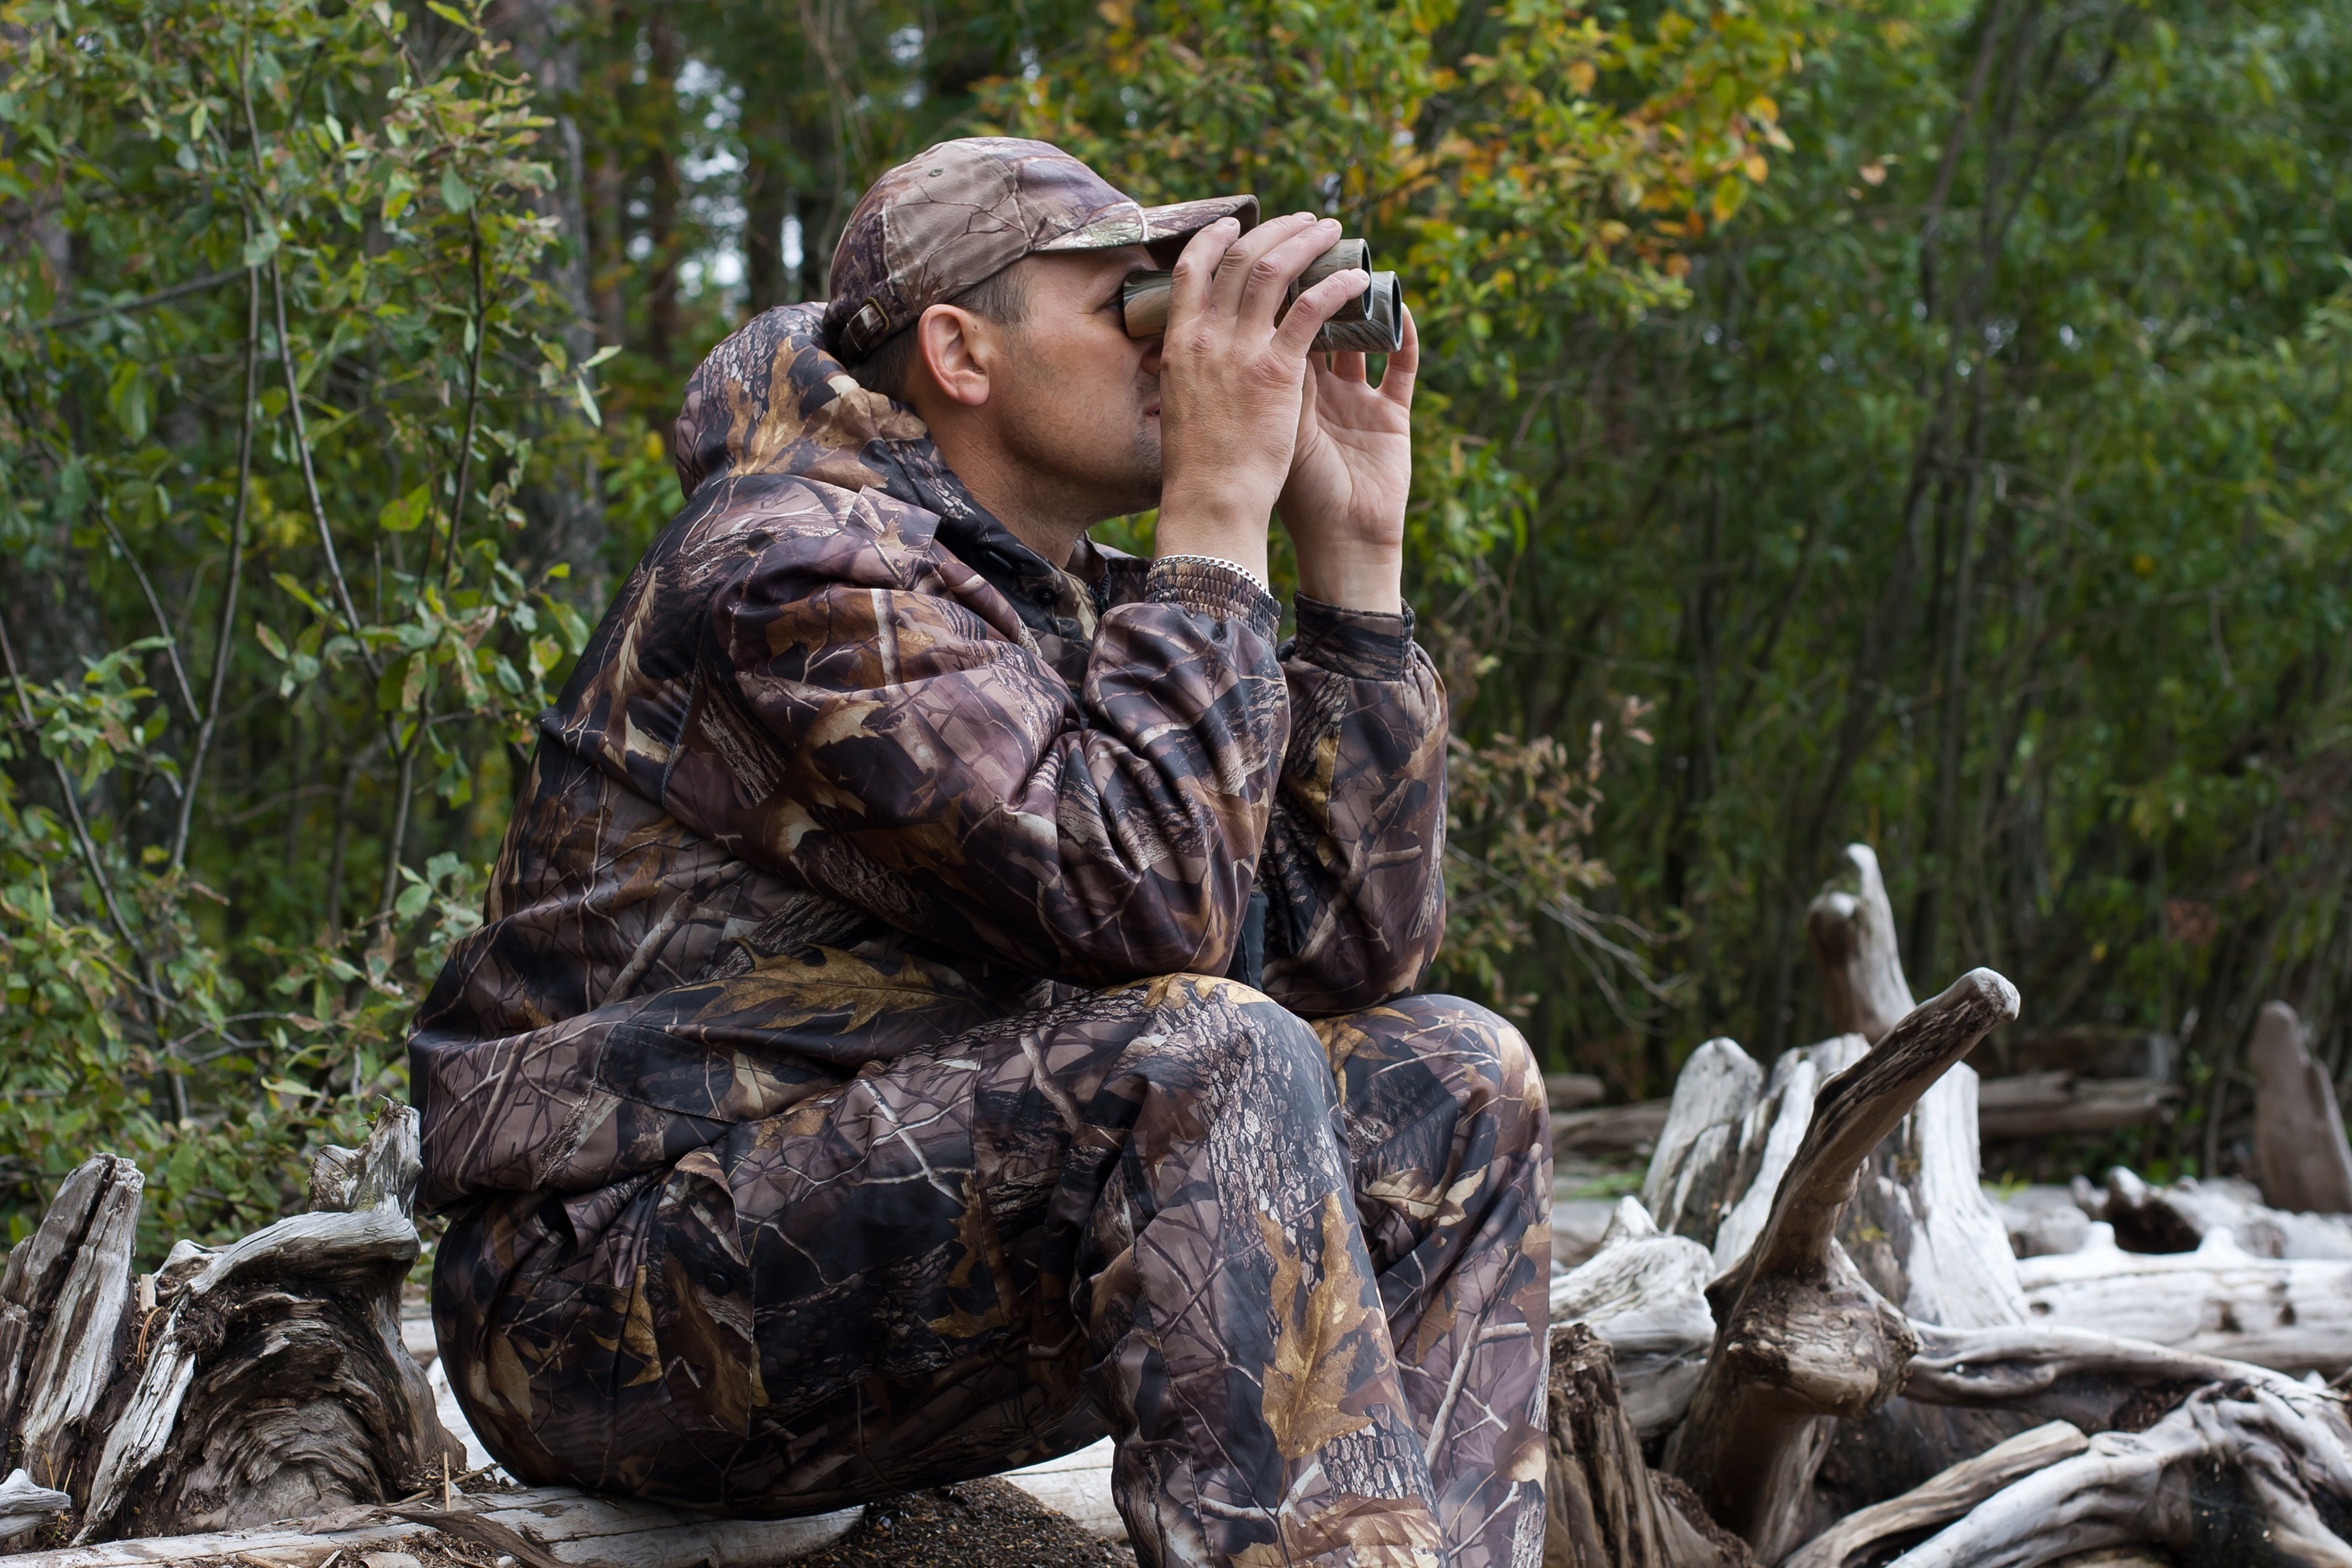 43 Hunting and Fishing Terms, and Their (Tongue-in-Cheek) Meanings